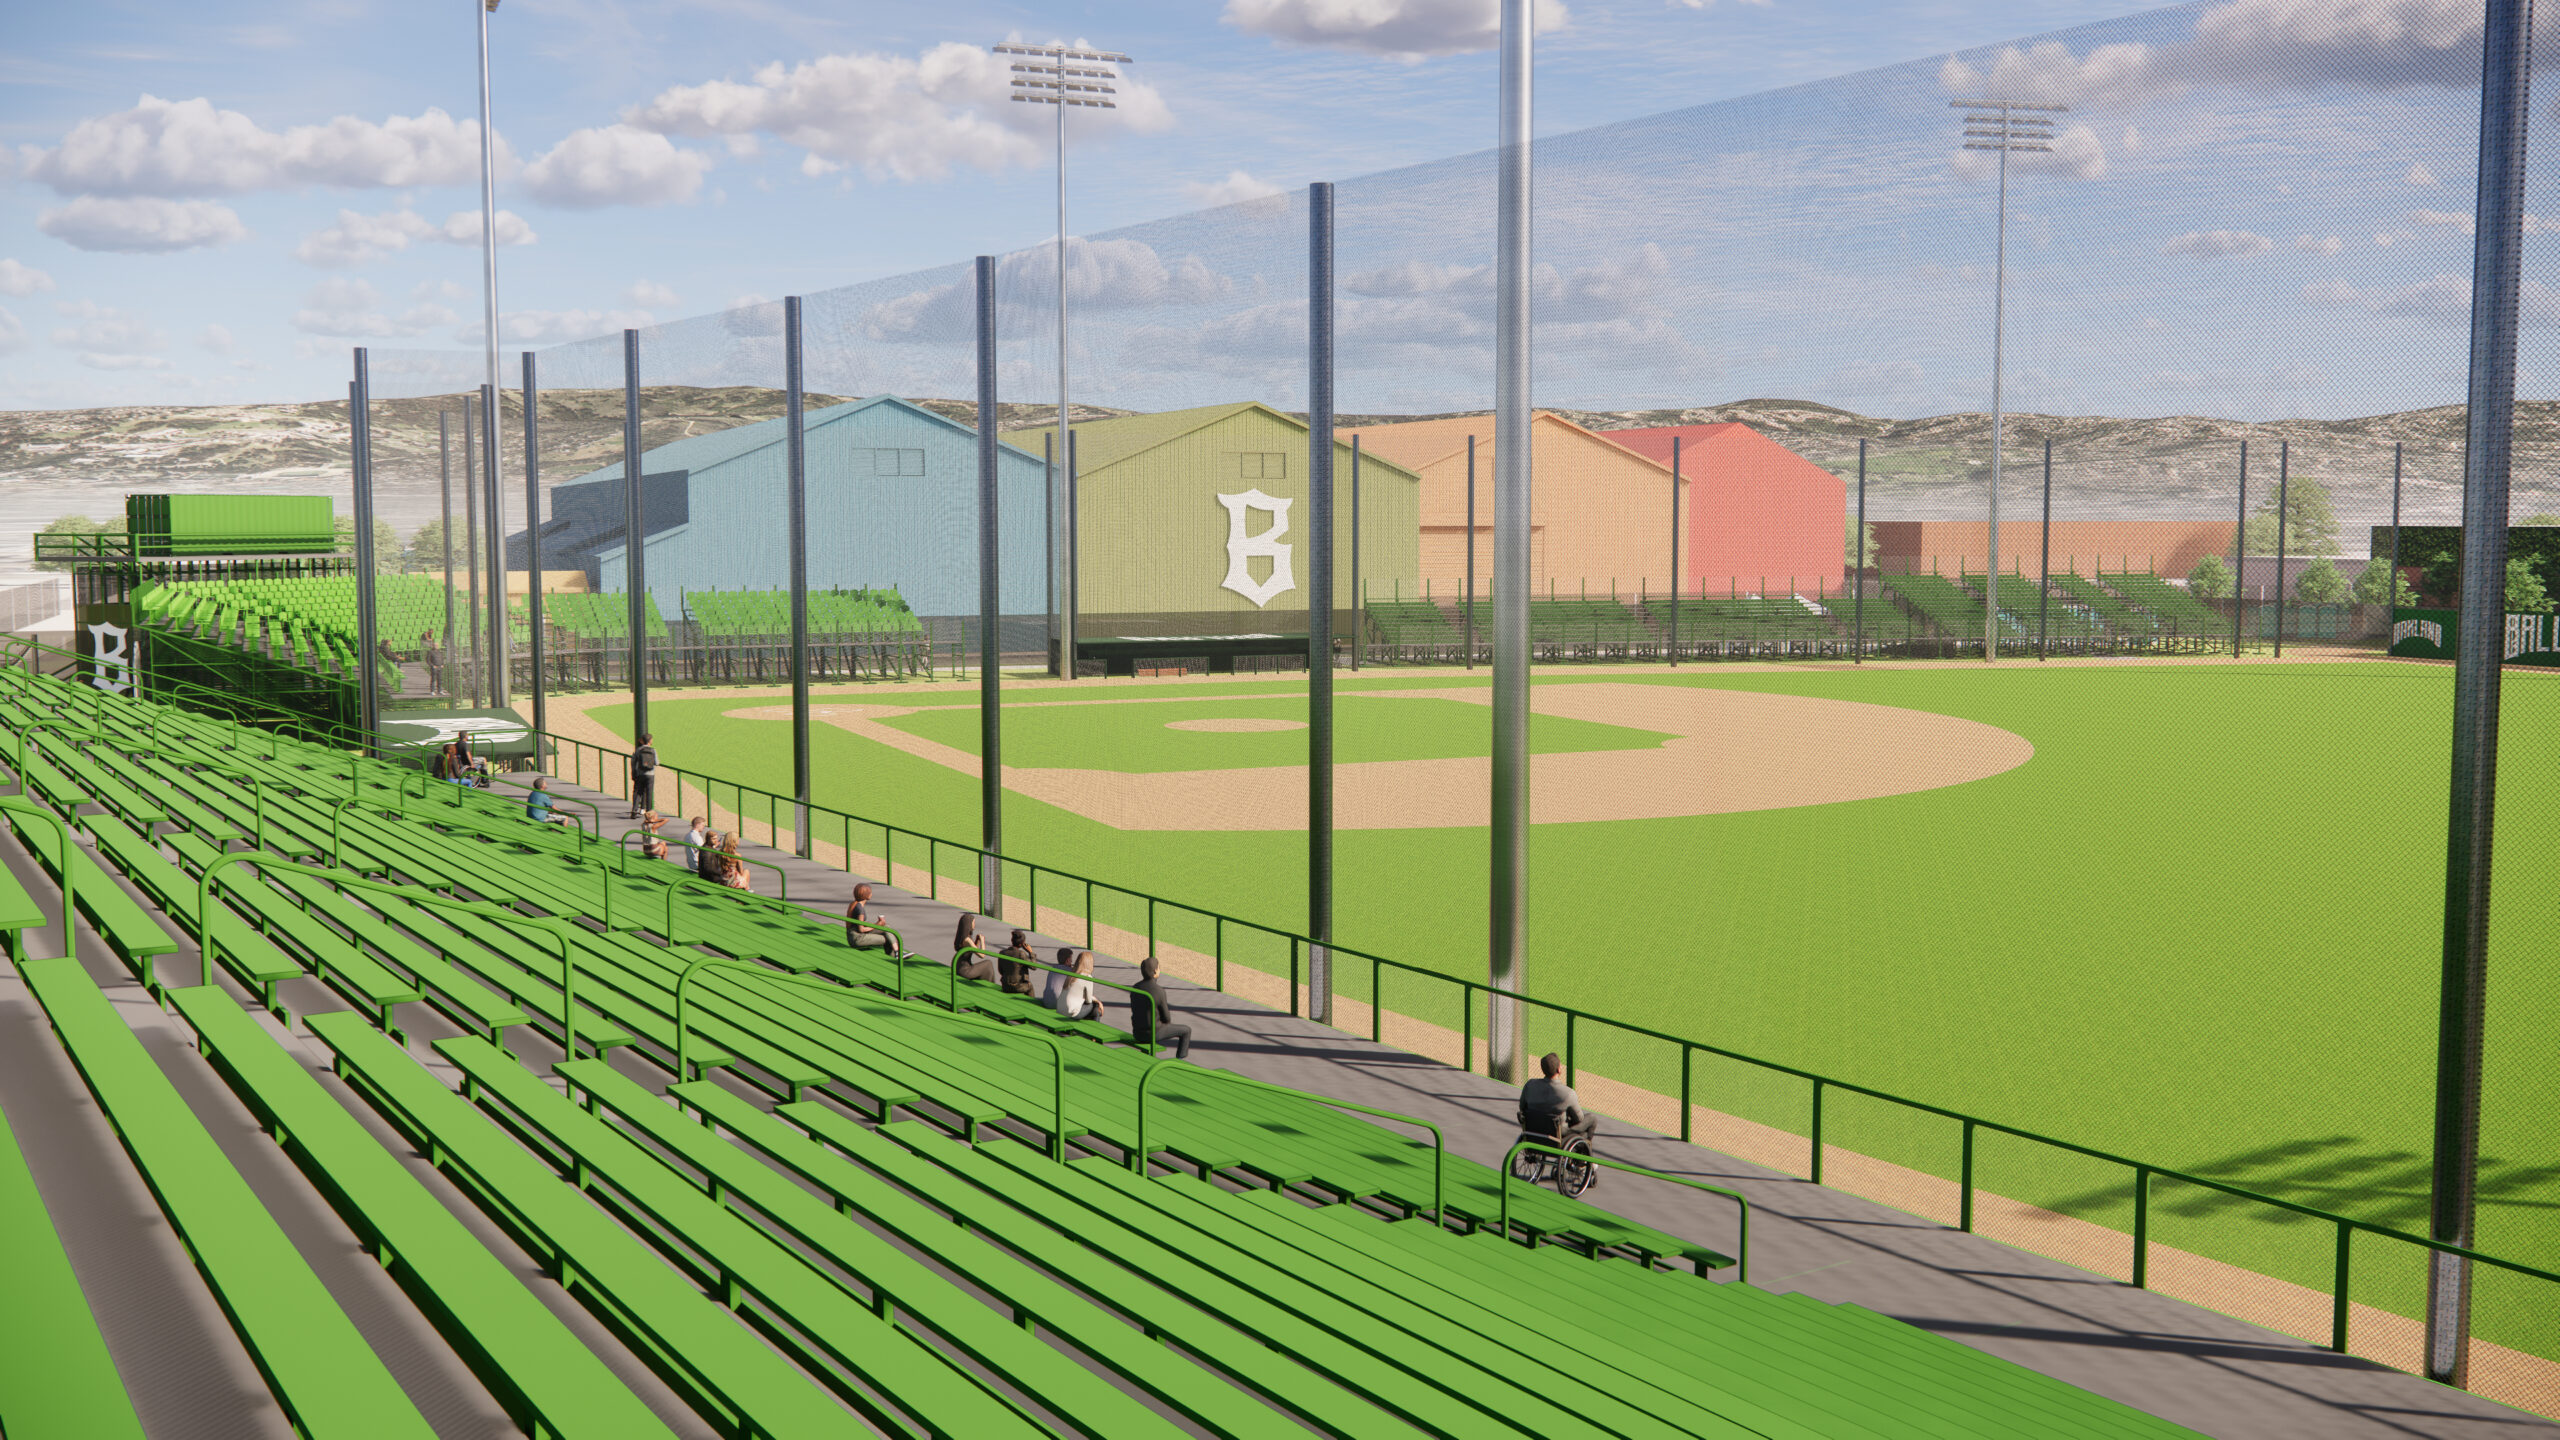 Oakland Ballers Baseball Field bleacher view showing the painted next door warehouses, rendering by Enscape for Canopy Team